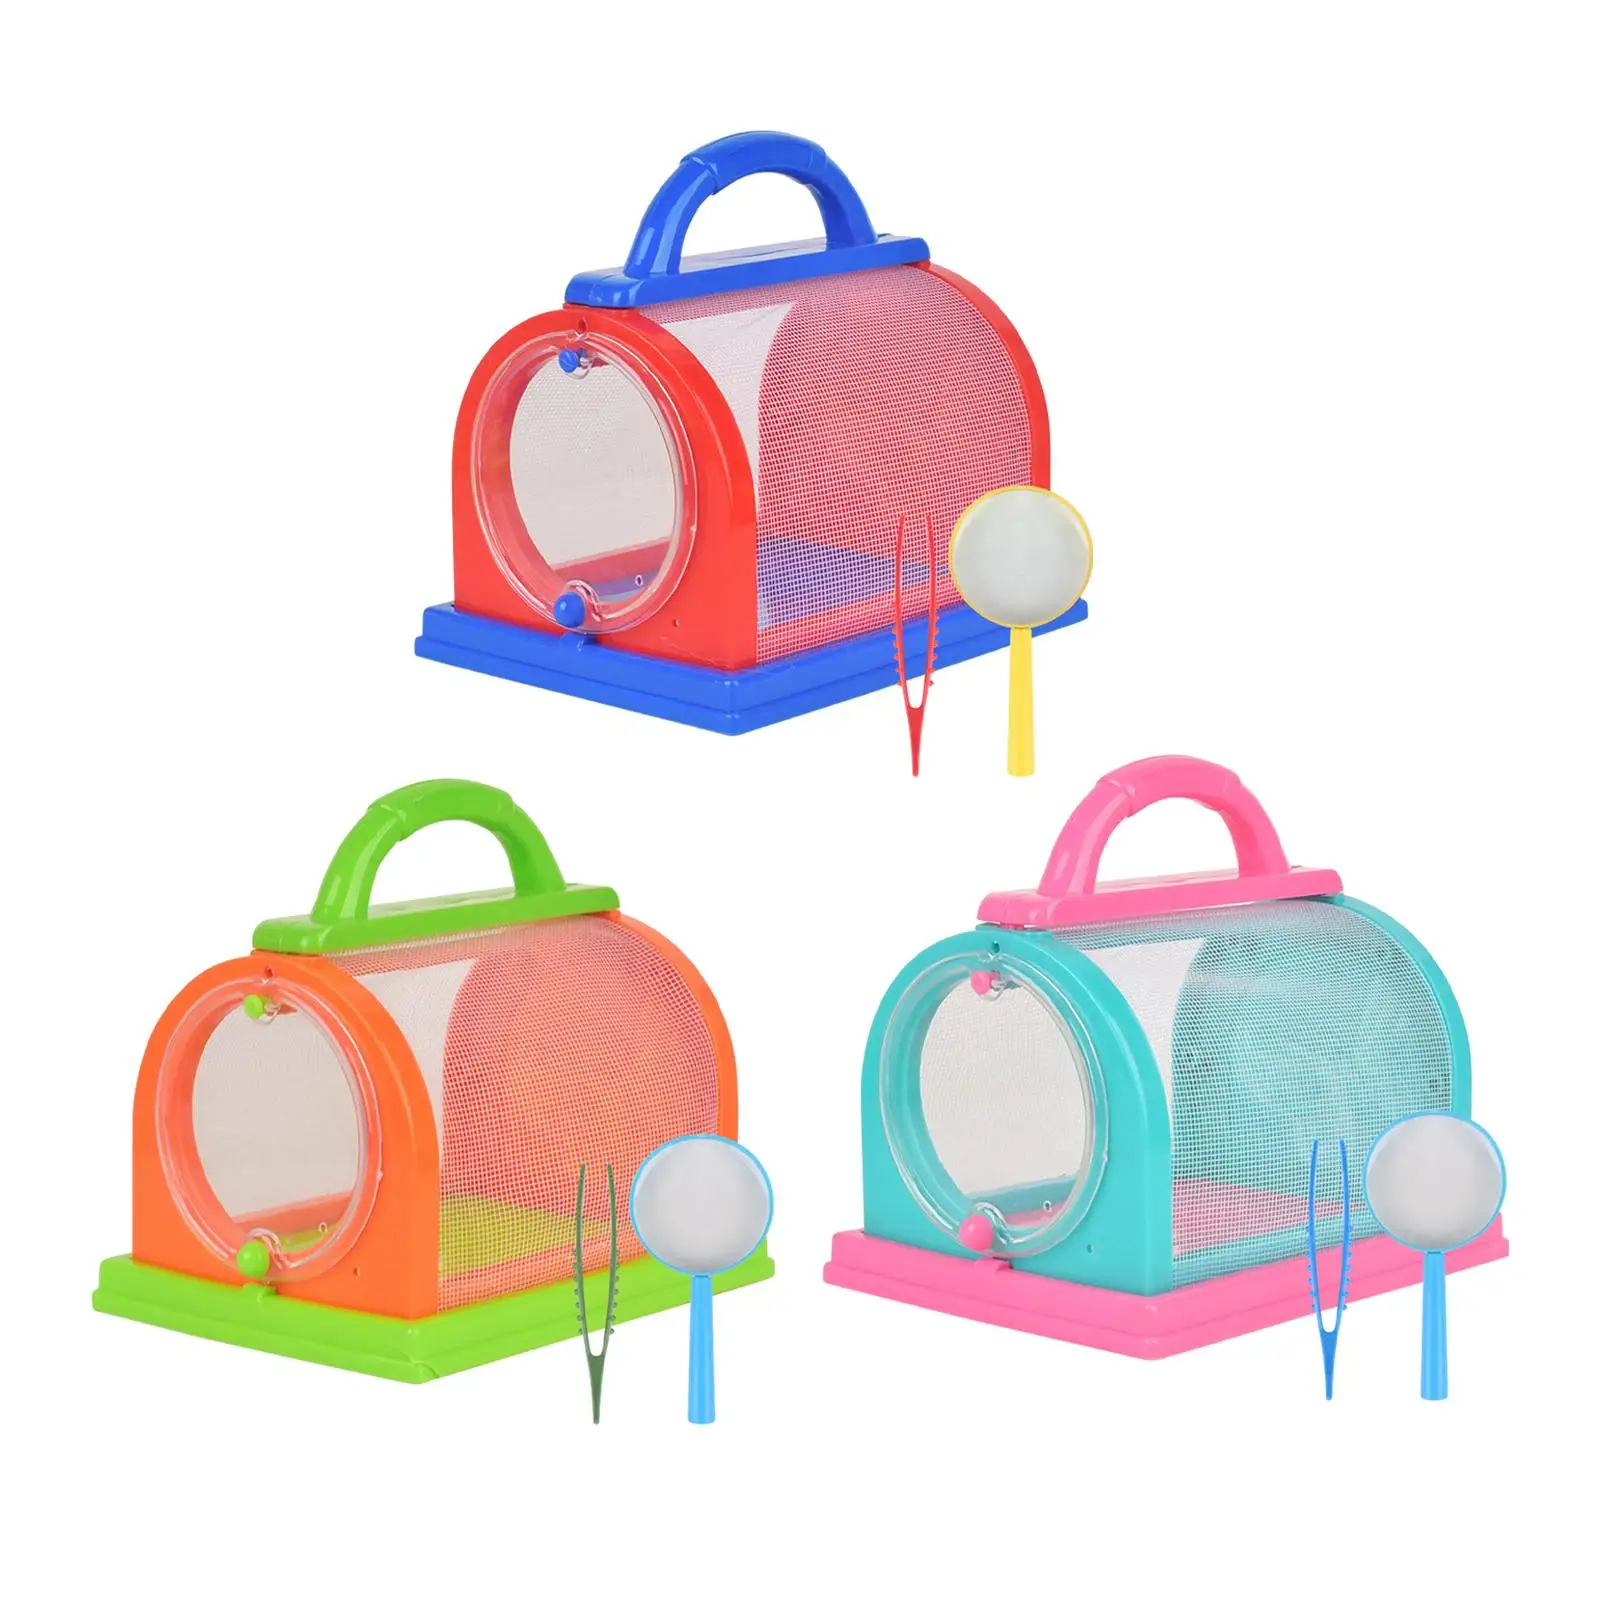 Butterfly Observation Box Exploration Equipment Observe Viewer Container for Childs Toy Camping DIY Experiments Outdoor Backyard